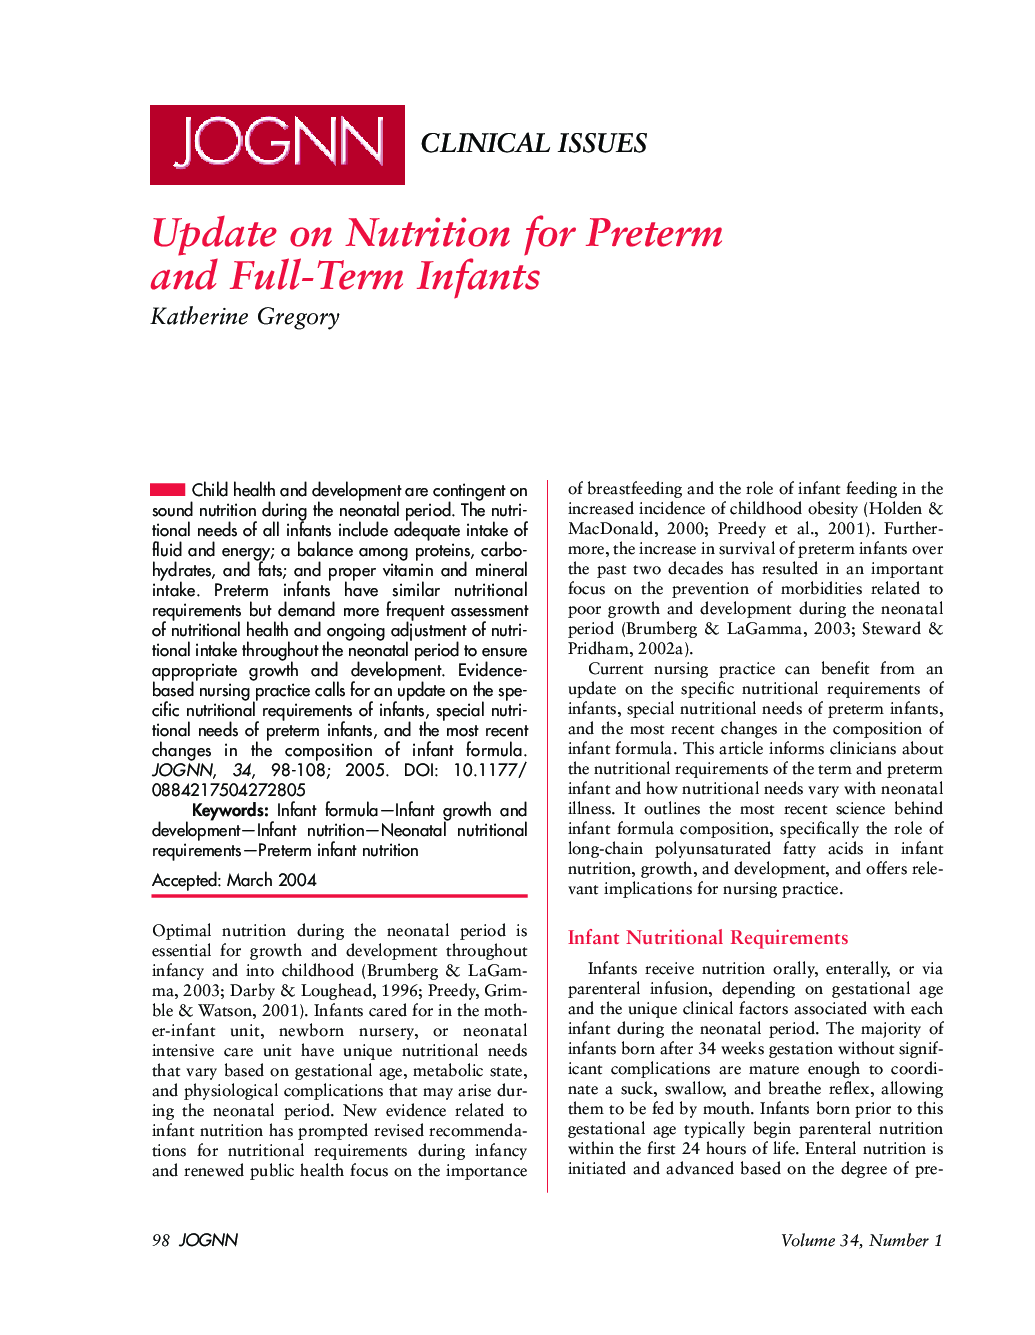 Update on Nutrition for Preterm and Full-Term Infants